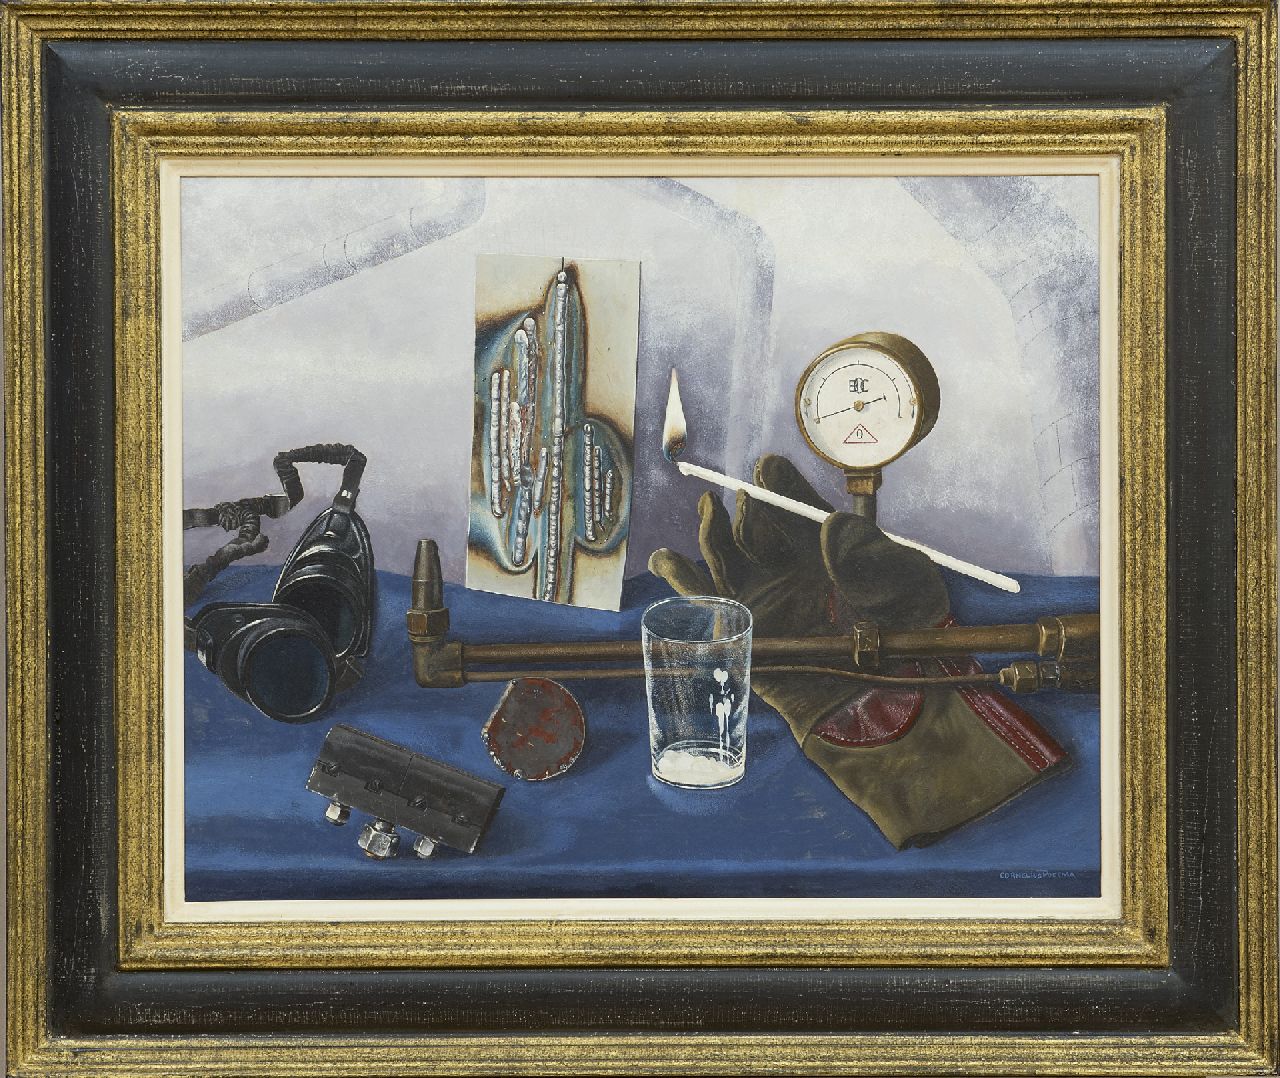 Postma C.J.  | Cornelis Johannes 'Kor' Postma | Paintings offered for sale | Still life with welding attributes, oil on paper 38.0 x 47.9 cm, signed l.r. and painted circa 1956